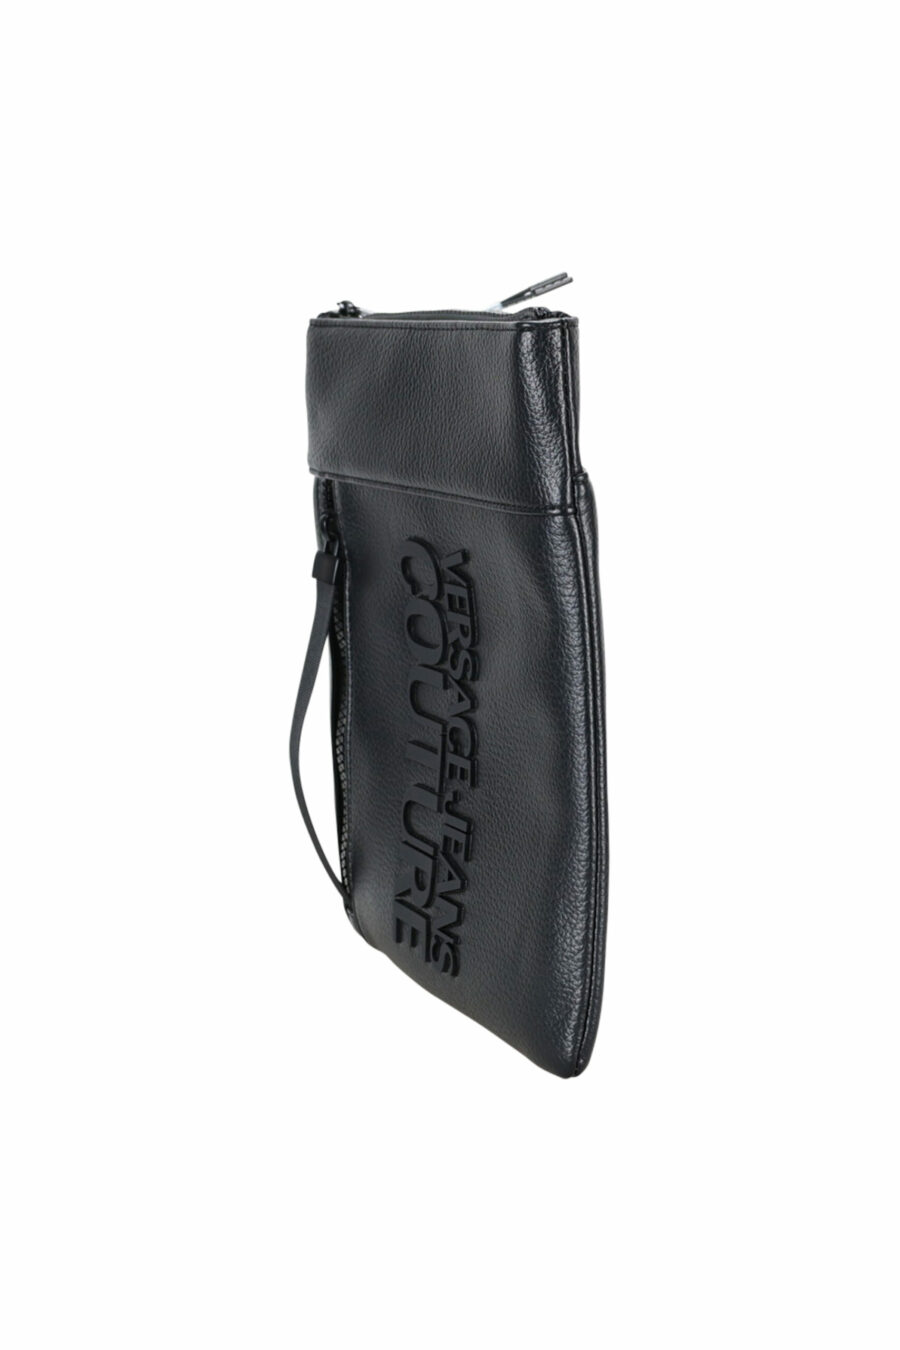 Crossbody bag with vertical maxilogo in silver lettering - 8052019409512 2 scaled